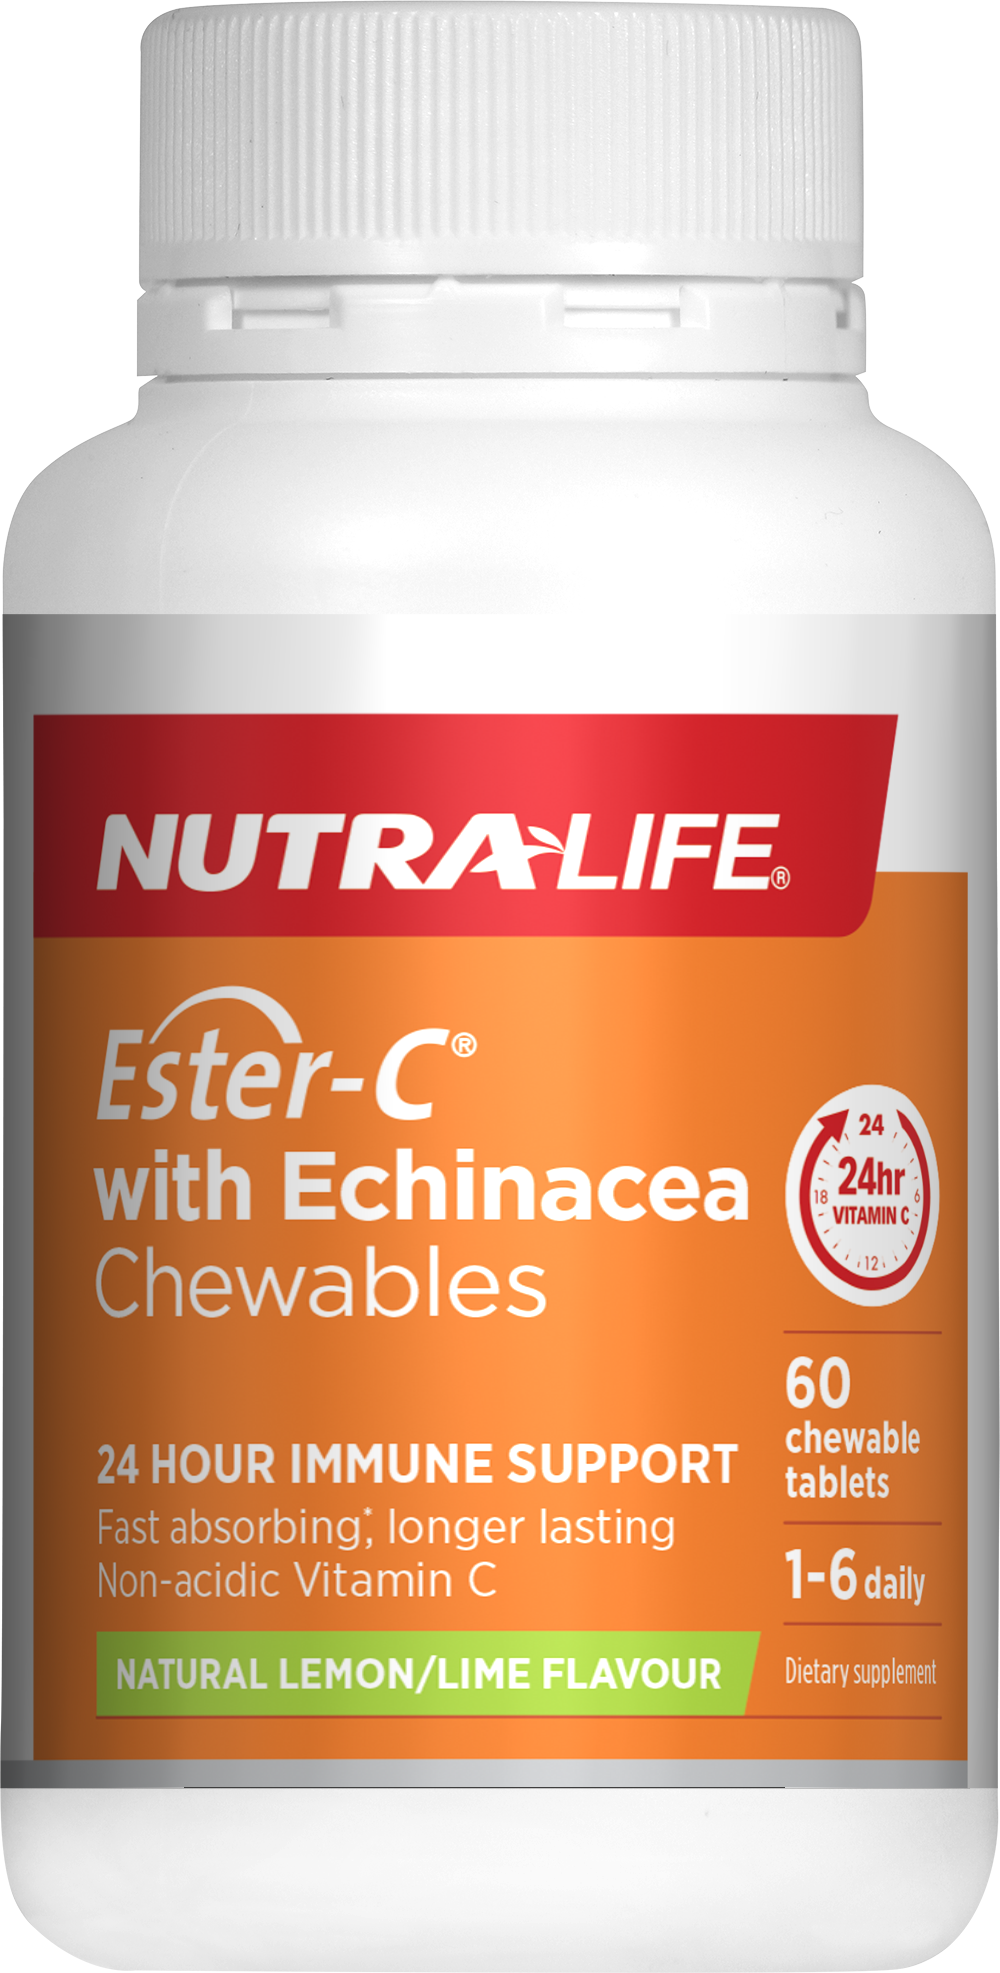 Nutralife Ester C+ Echinacea 60 Chewable tablets